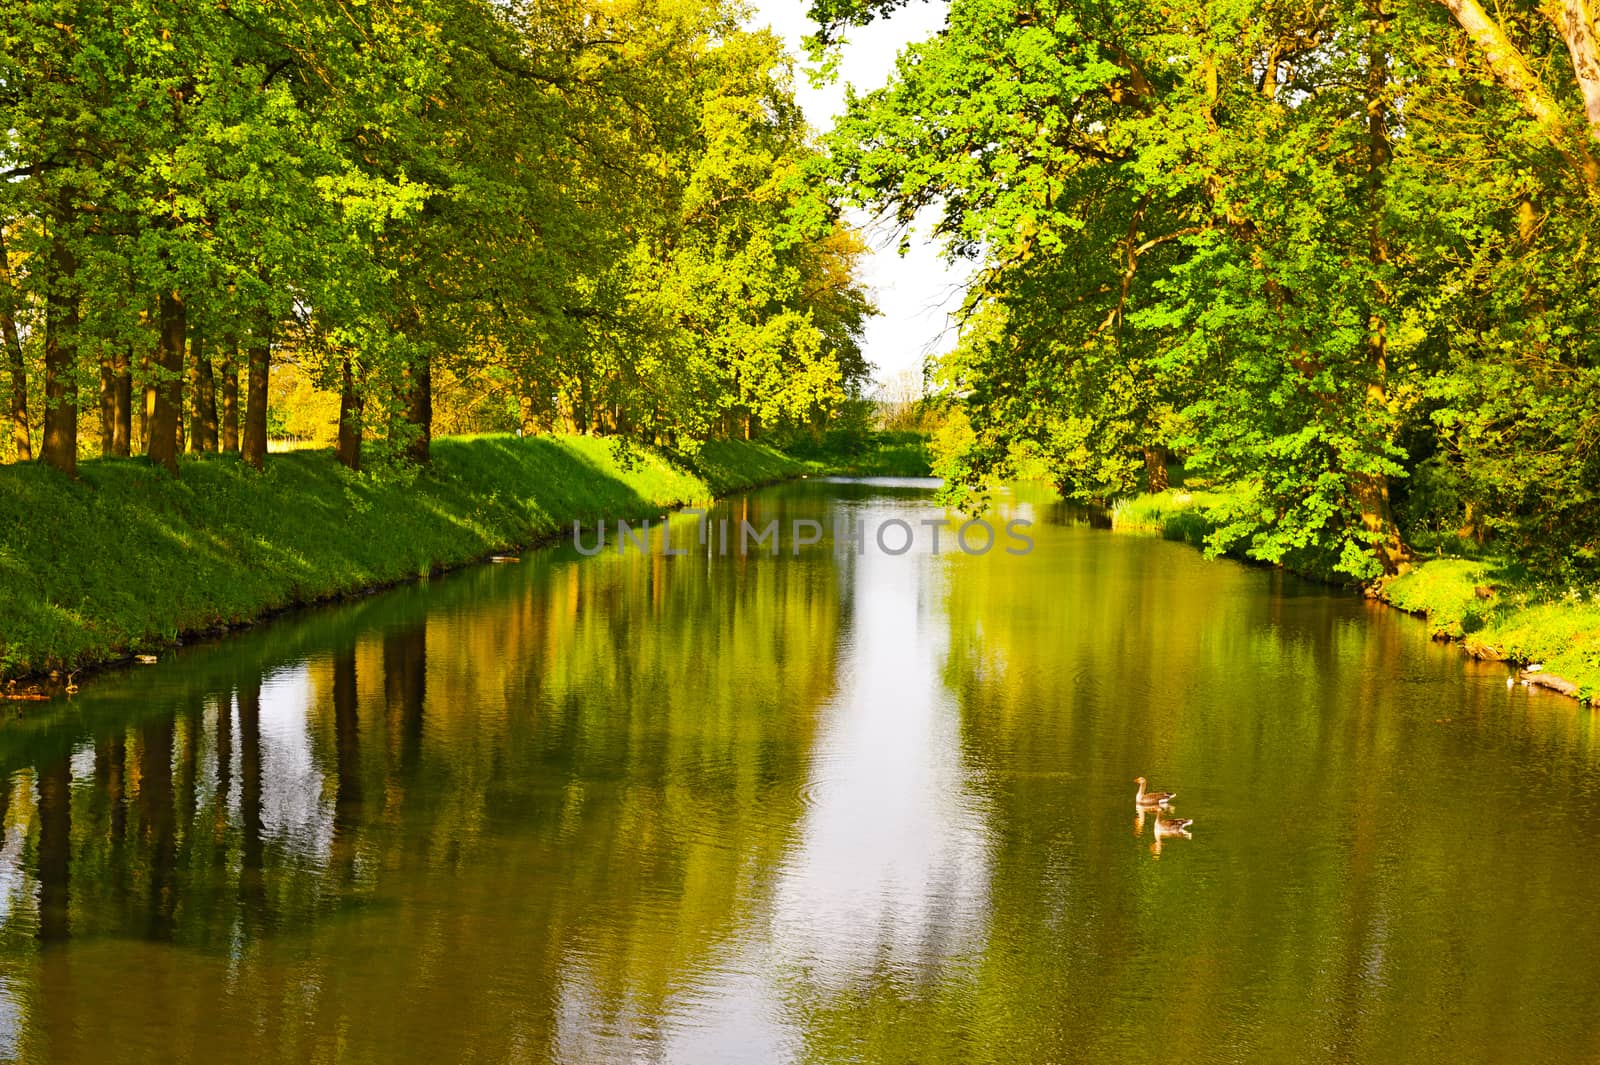 Greenwood on the Canal Bank in the Netherlands